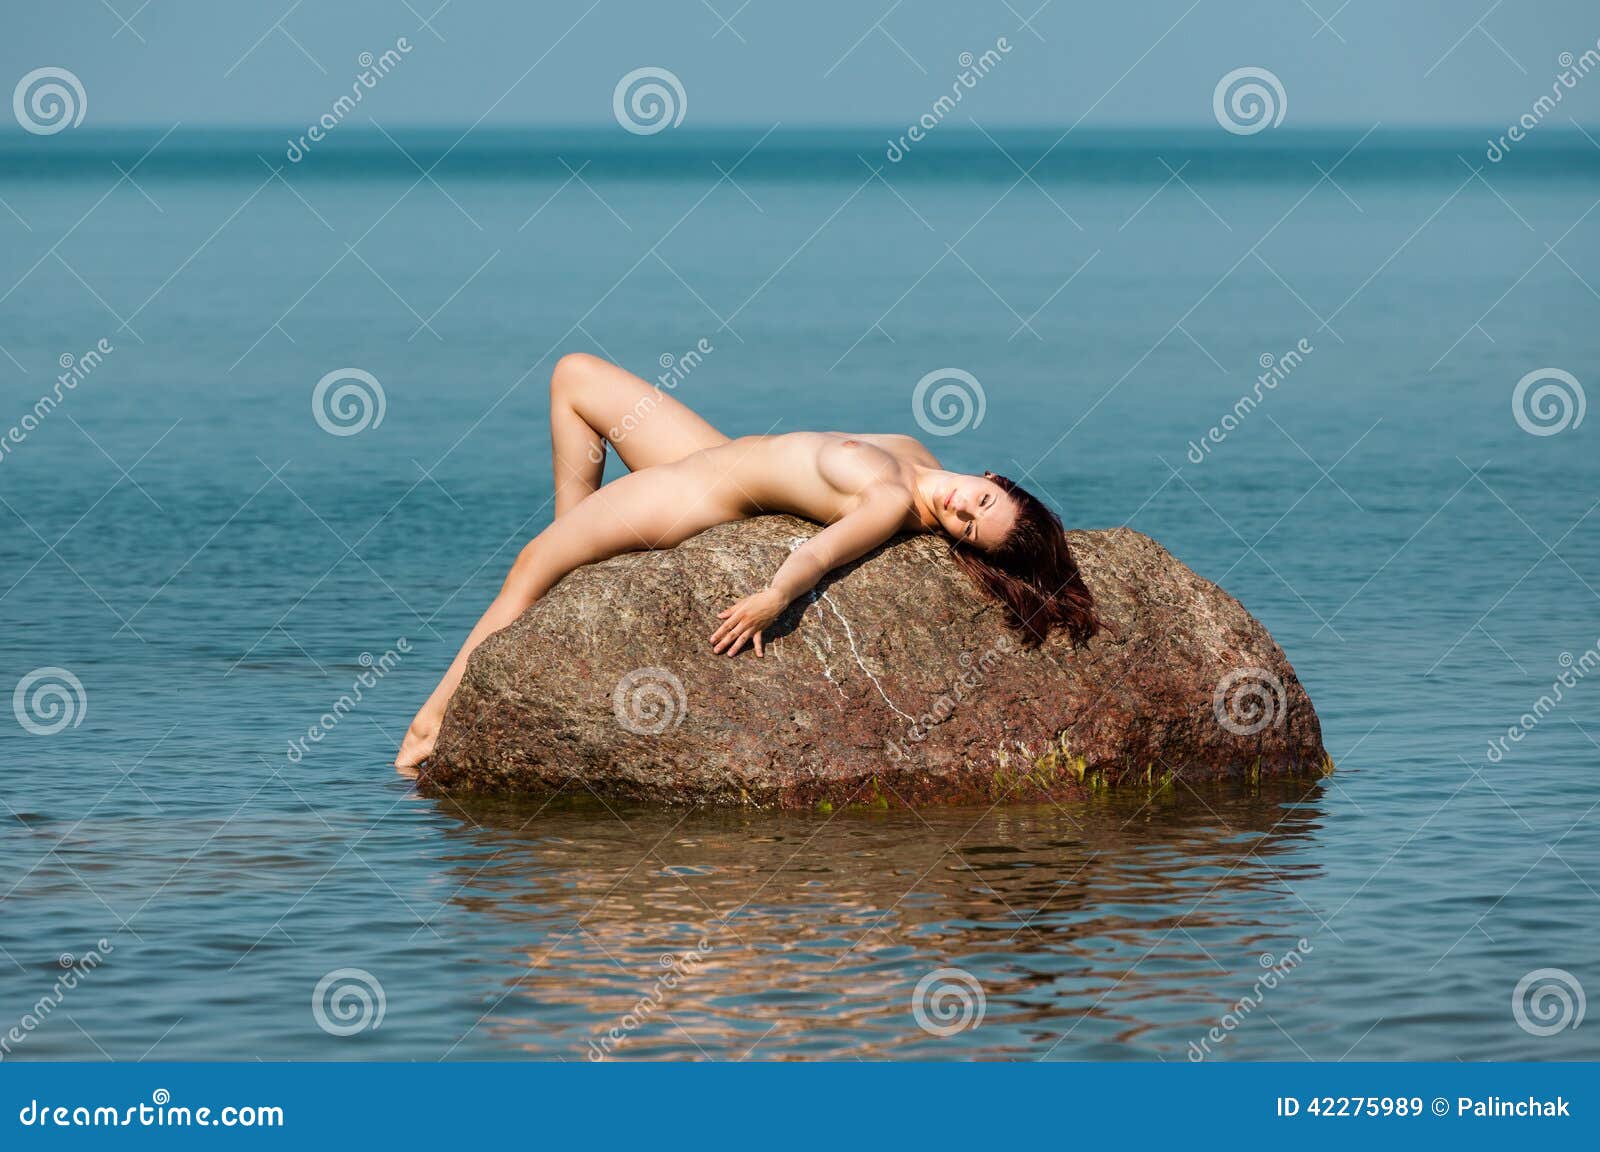 Nude Woman Lying on a Rock in the Sea Stock Image - Image of